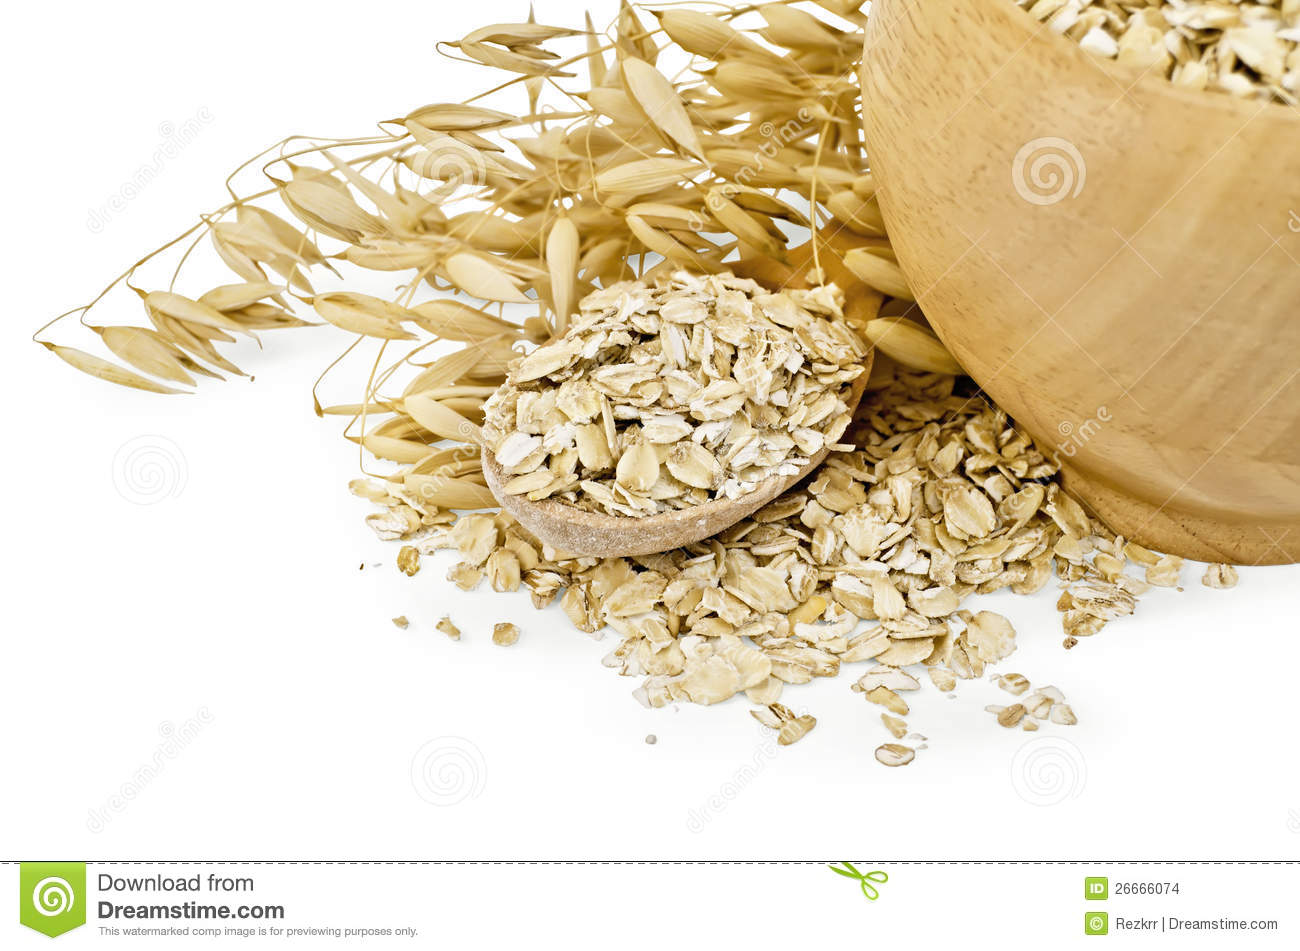 Oat Flakes In A Wooden Bowl And Spoon Stalks Of Oats With A Light